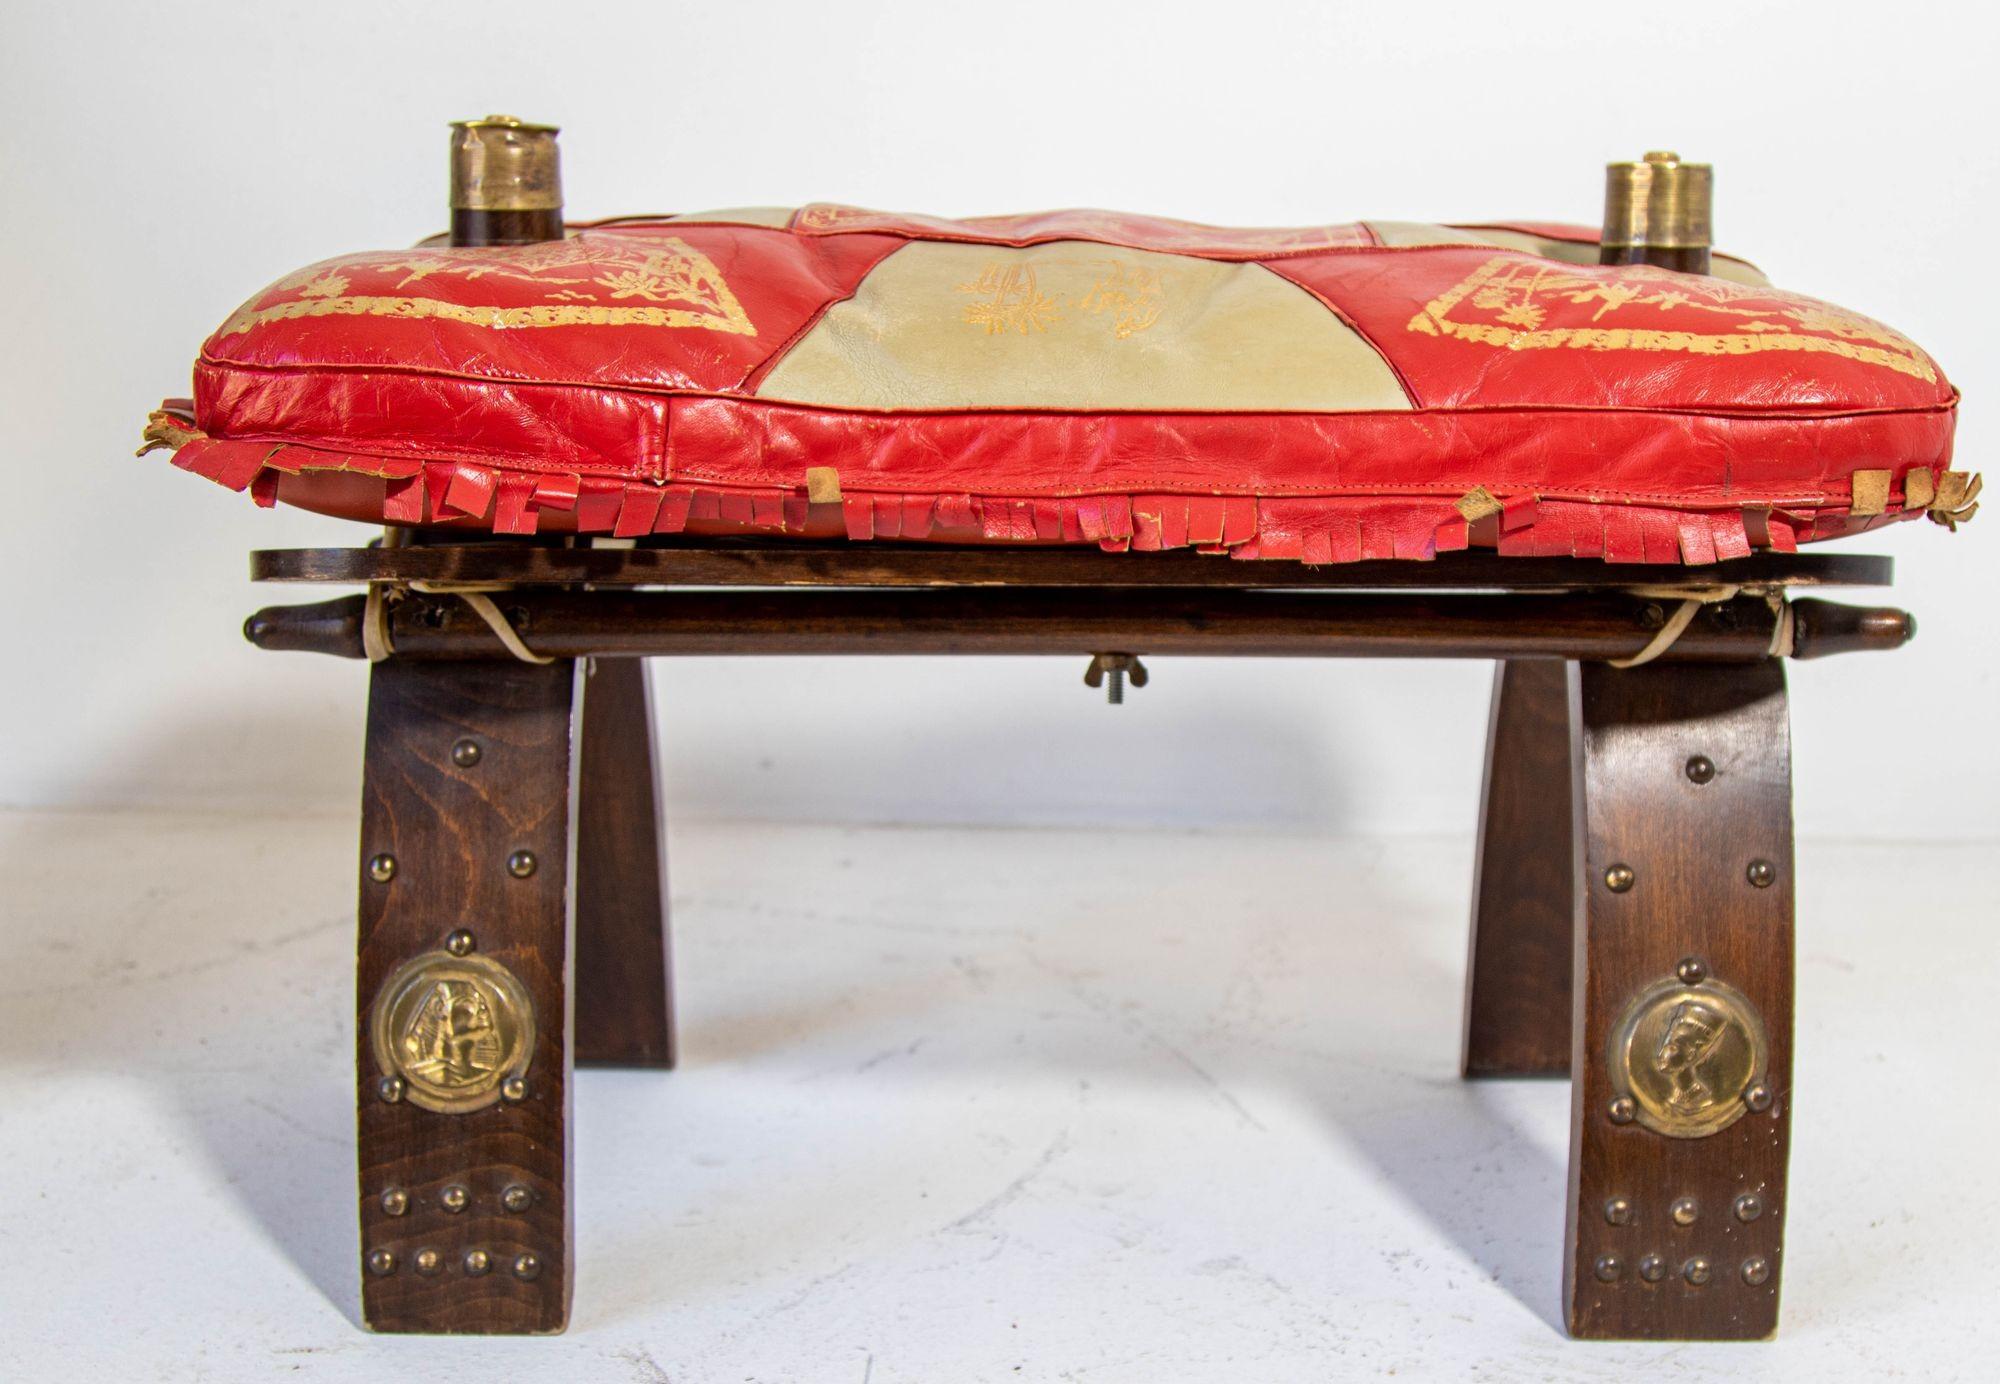 1950s Egyptian Ottoman Camel Saddle Stool with Red and Gold Cushion For Sale 5